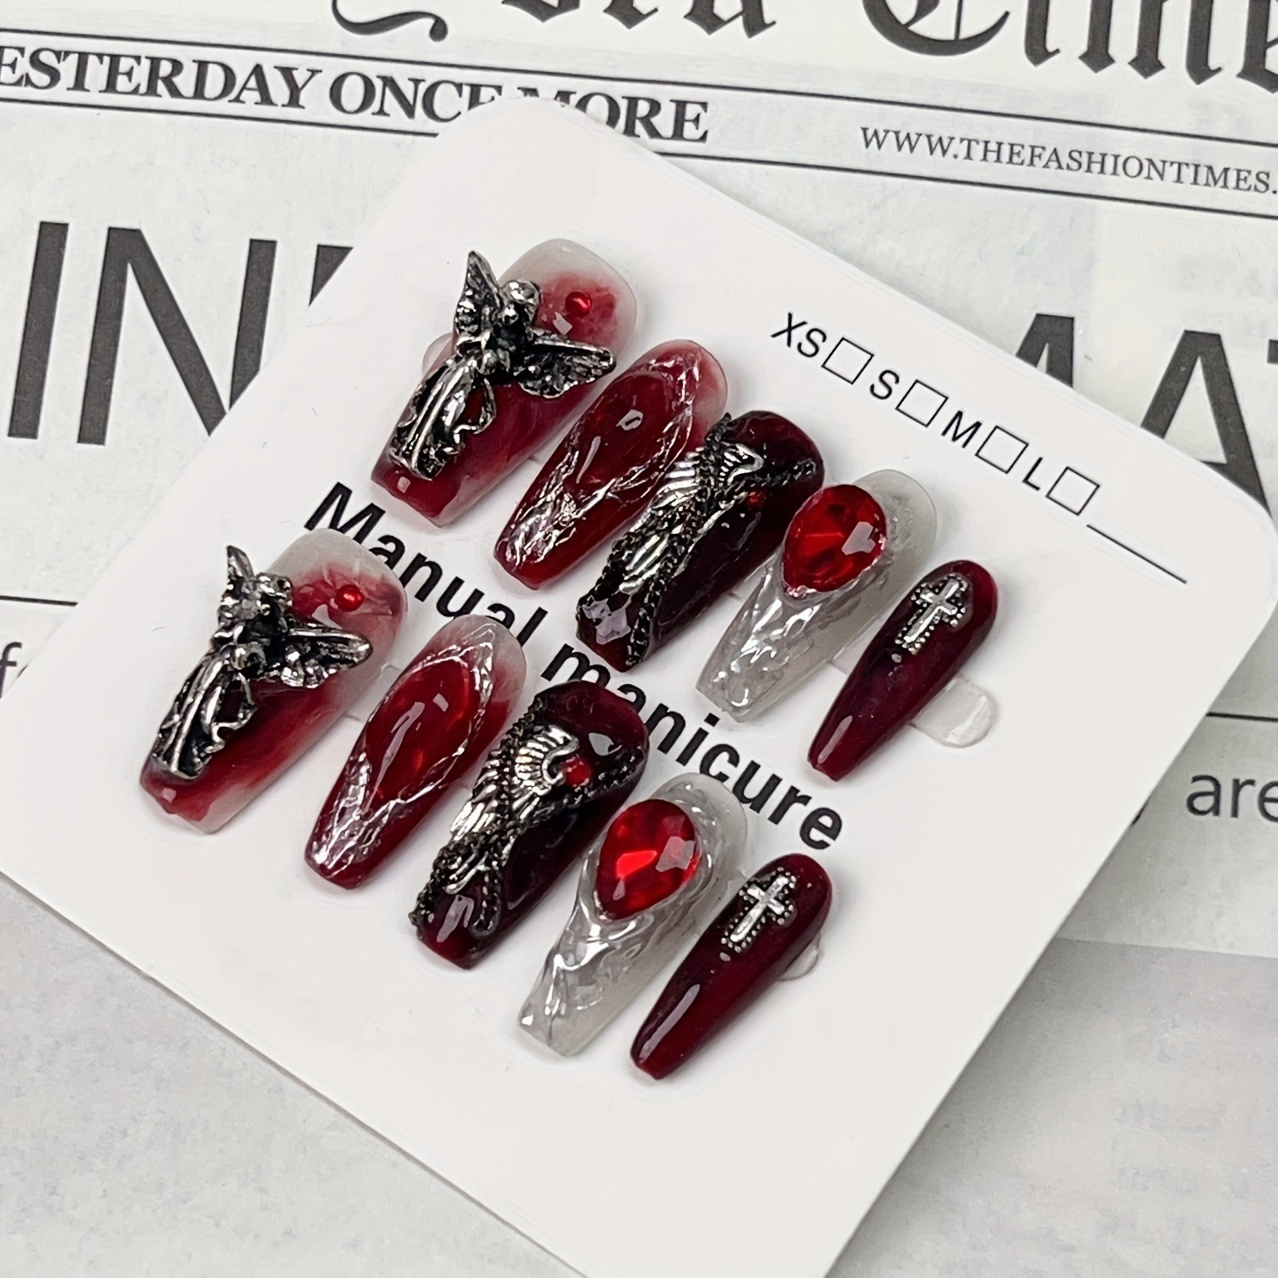 

10pcs Punk Style Handmade Press On Nails Red Fake Nails With Metallic Angel Cross Red Rhinestone Design, Glossy Long Coffin False Nails For Women Girls